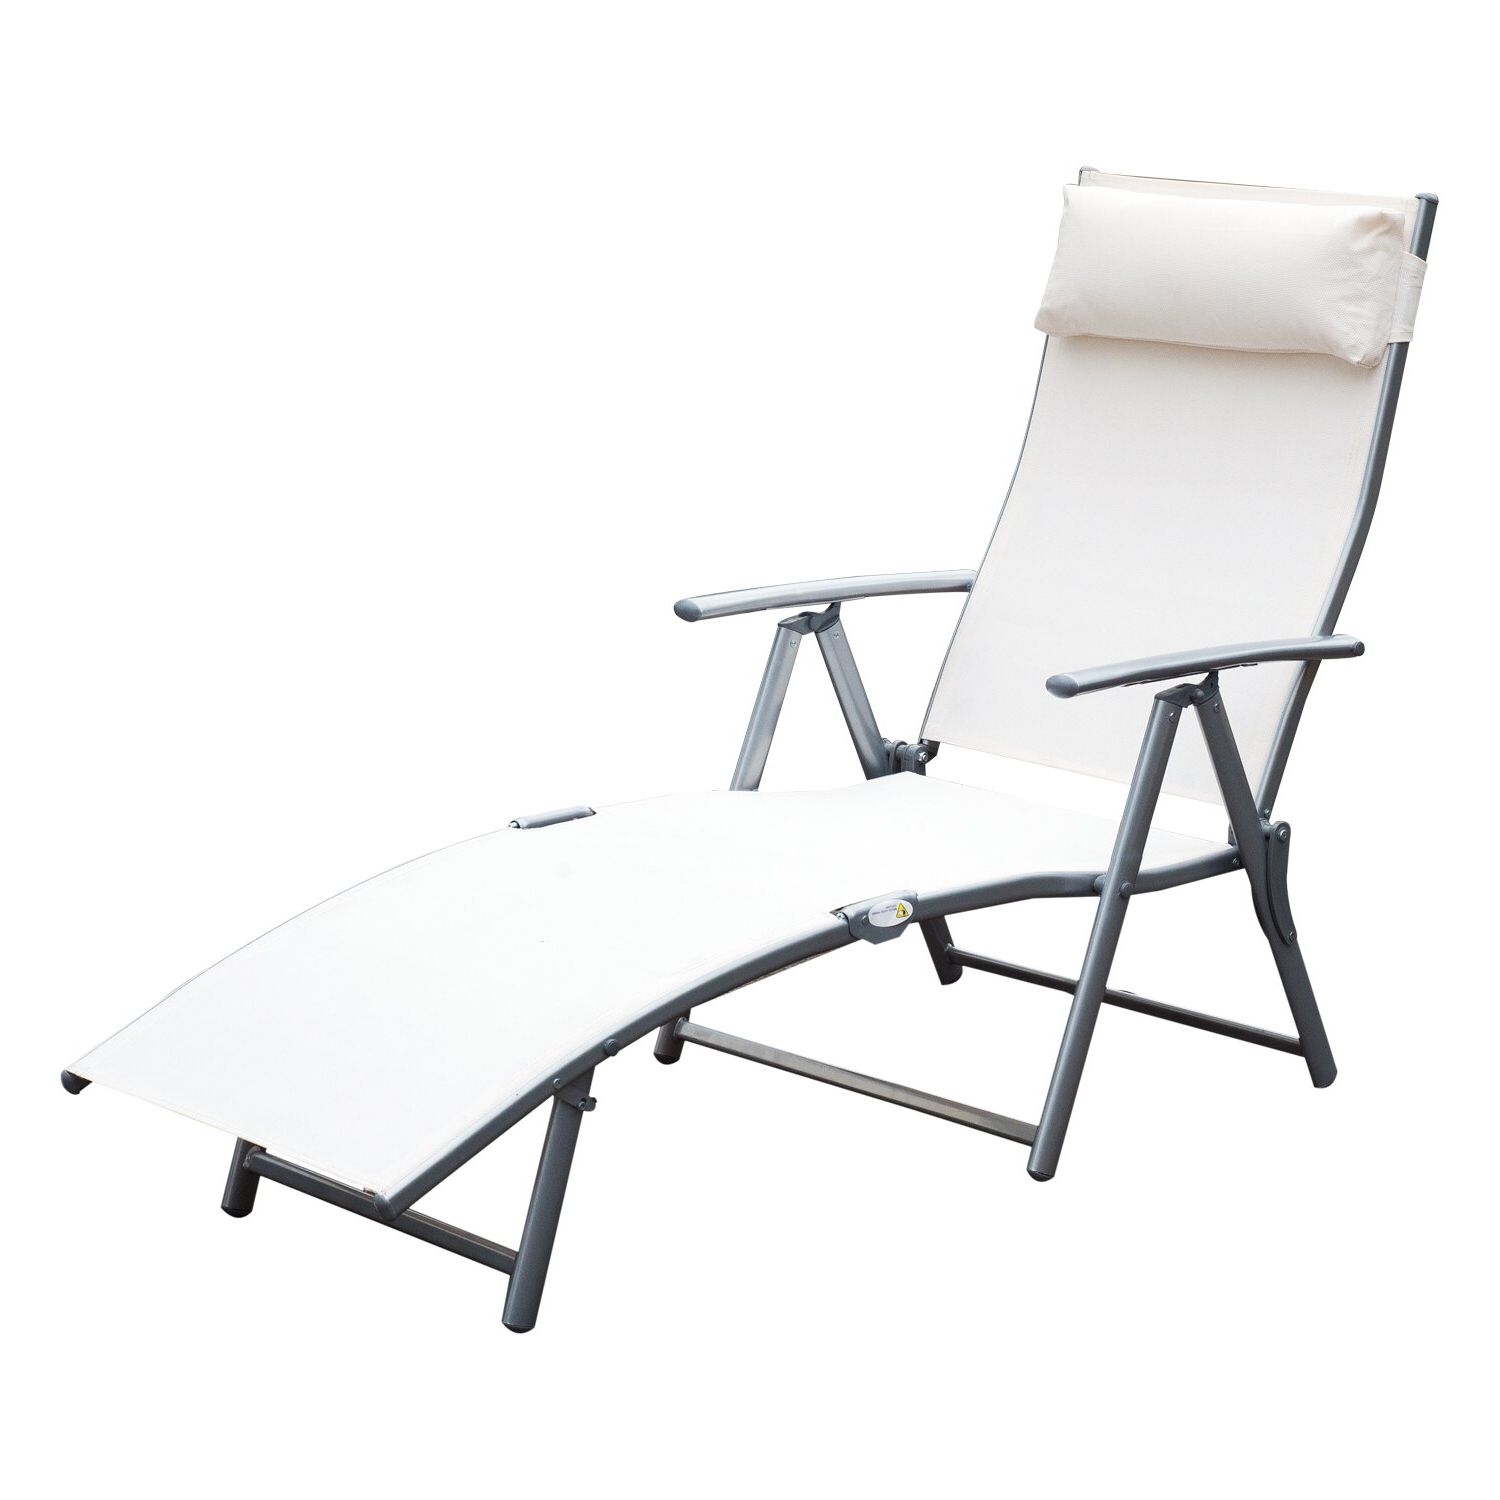 Trendy Reclining Sling Lounge Chairs Intended For Outsunny Sling Fabric Patio Reclining Chaise Lounge Chair Folding 5  Position Adjustable Outdoor Deck With Cushion – Cream White (View 2 of 25)